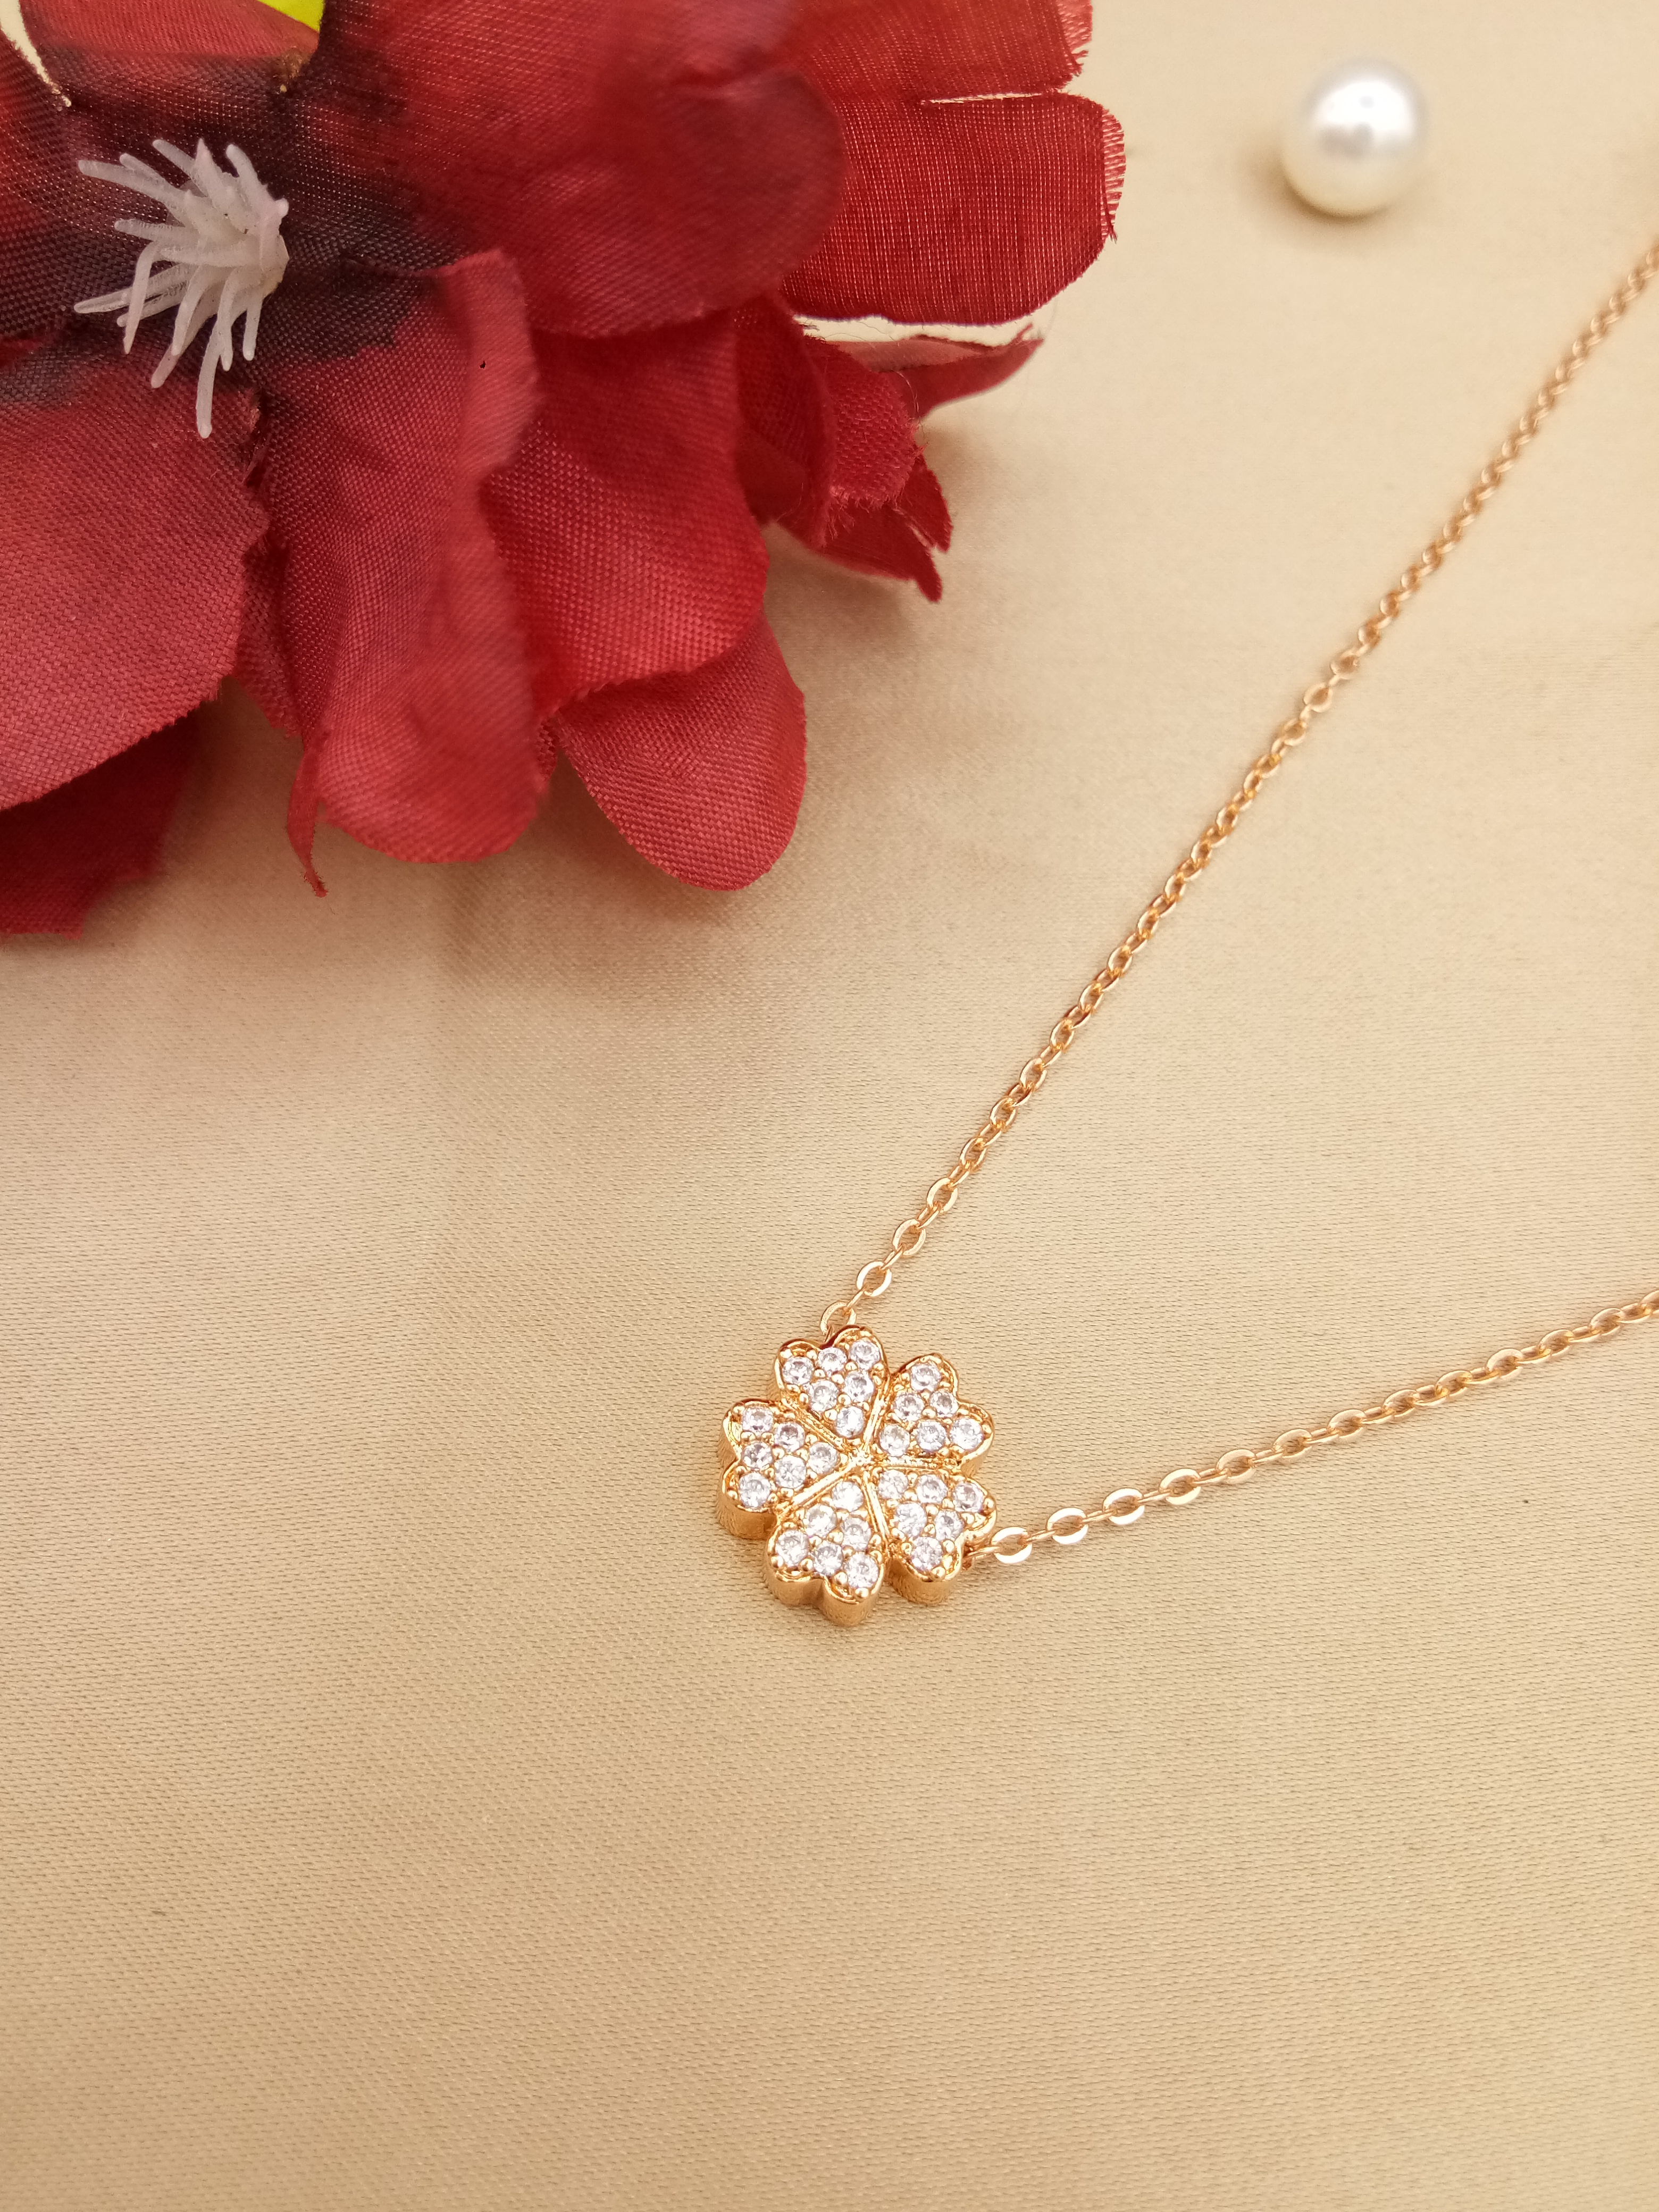 AD ROSE PENDENT - 07184 NX